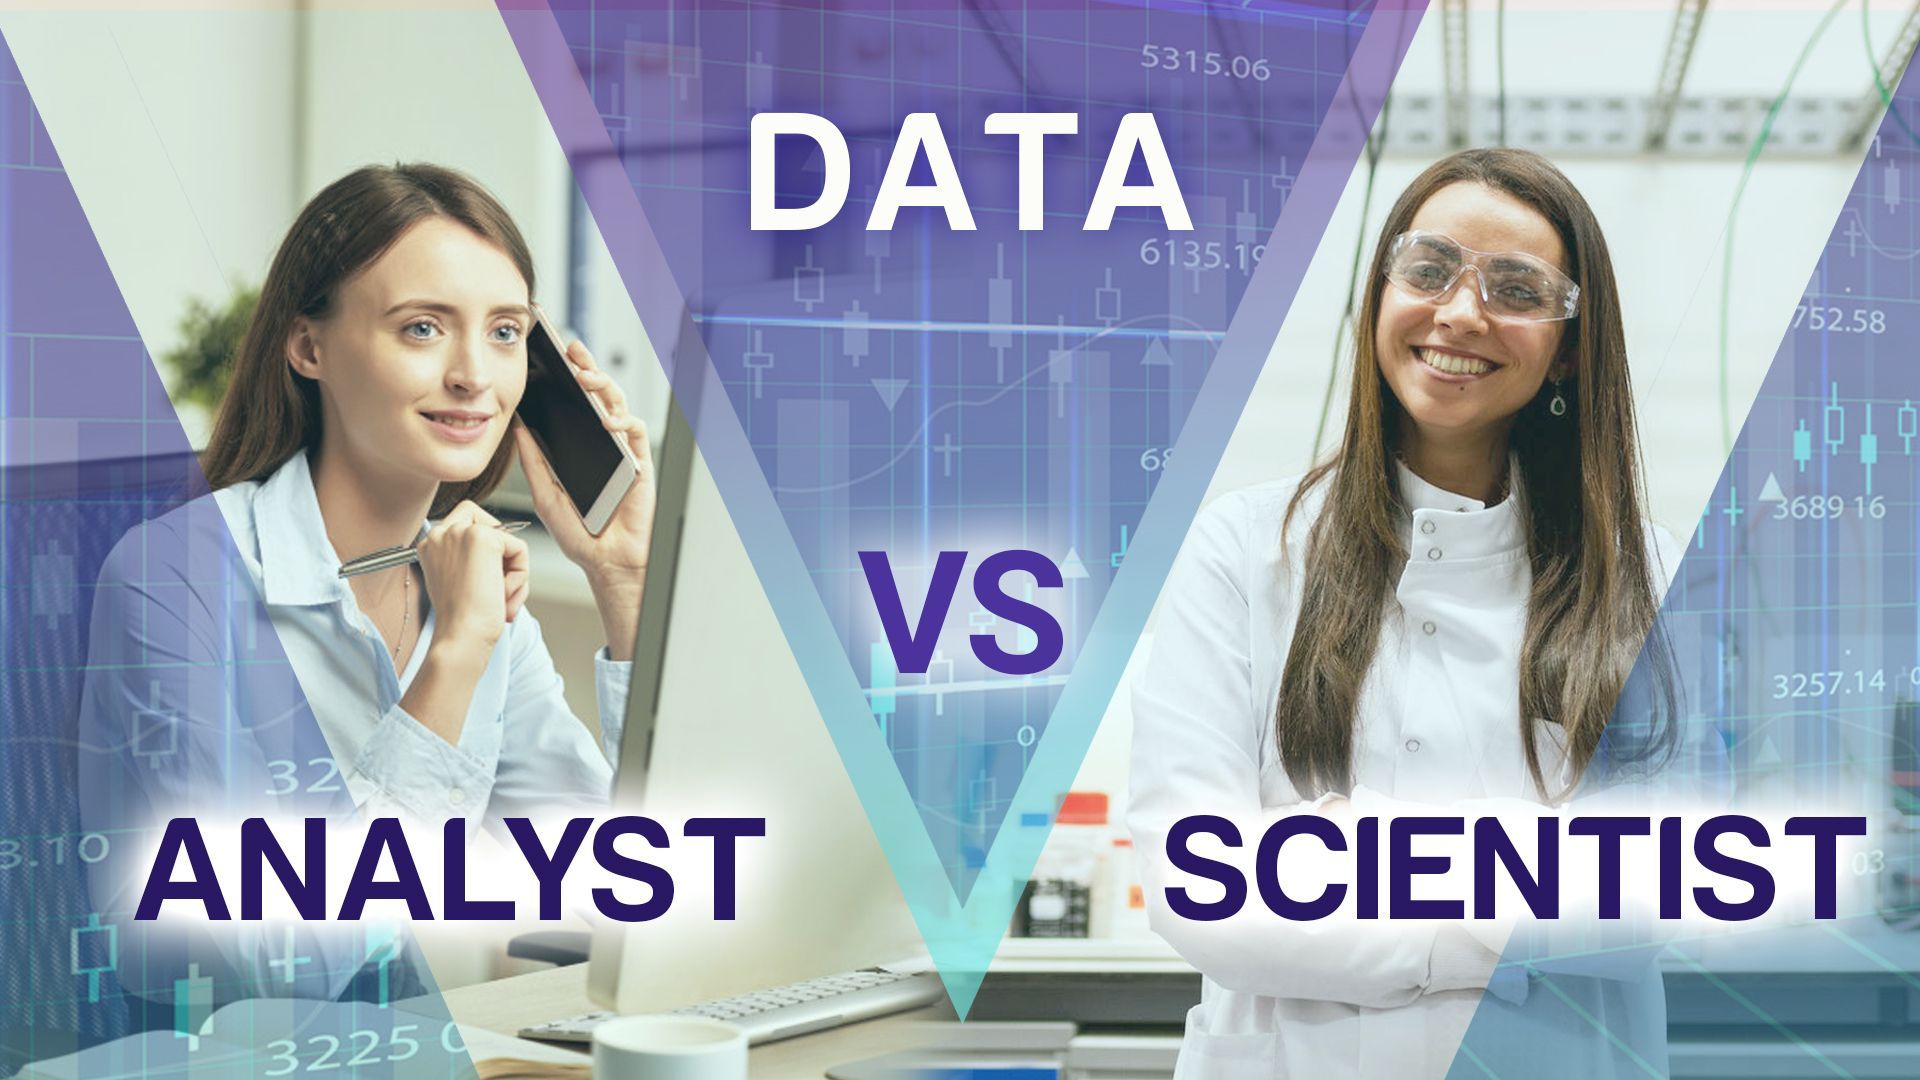 Data Science vs Data Analyst - What's the difference?